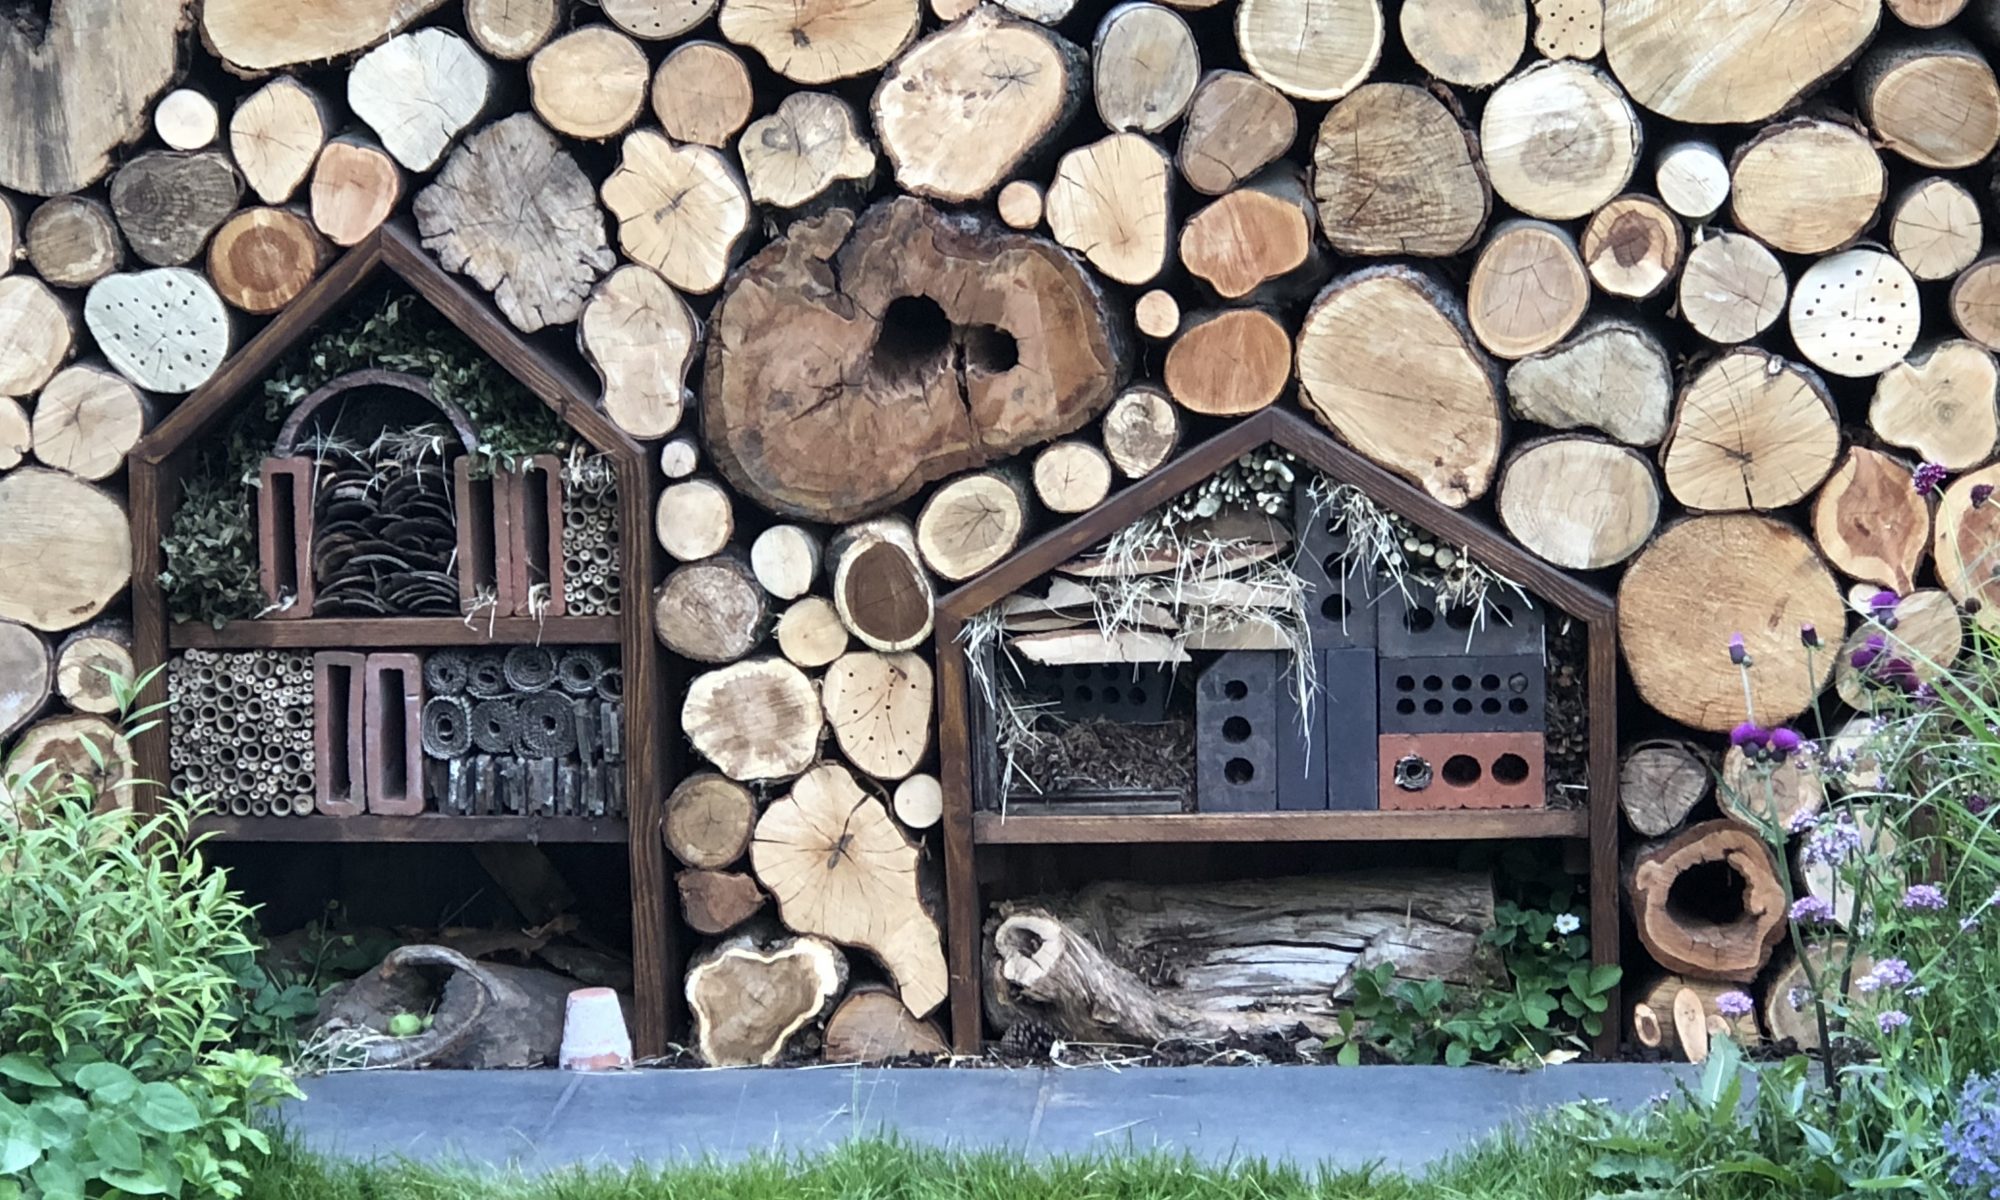 Bug hotels for overwintering insects